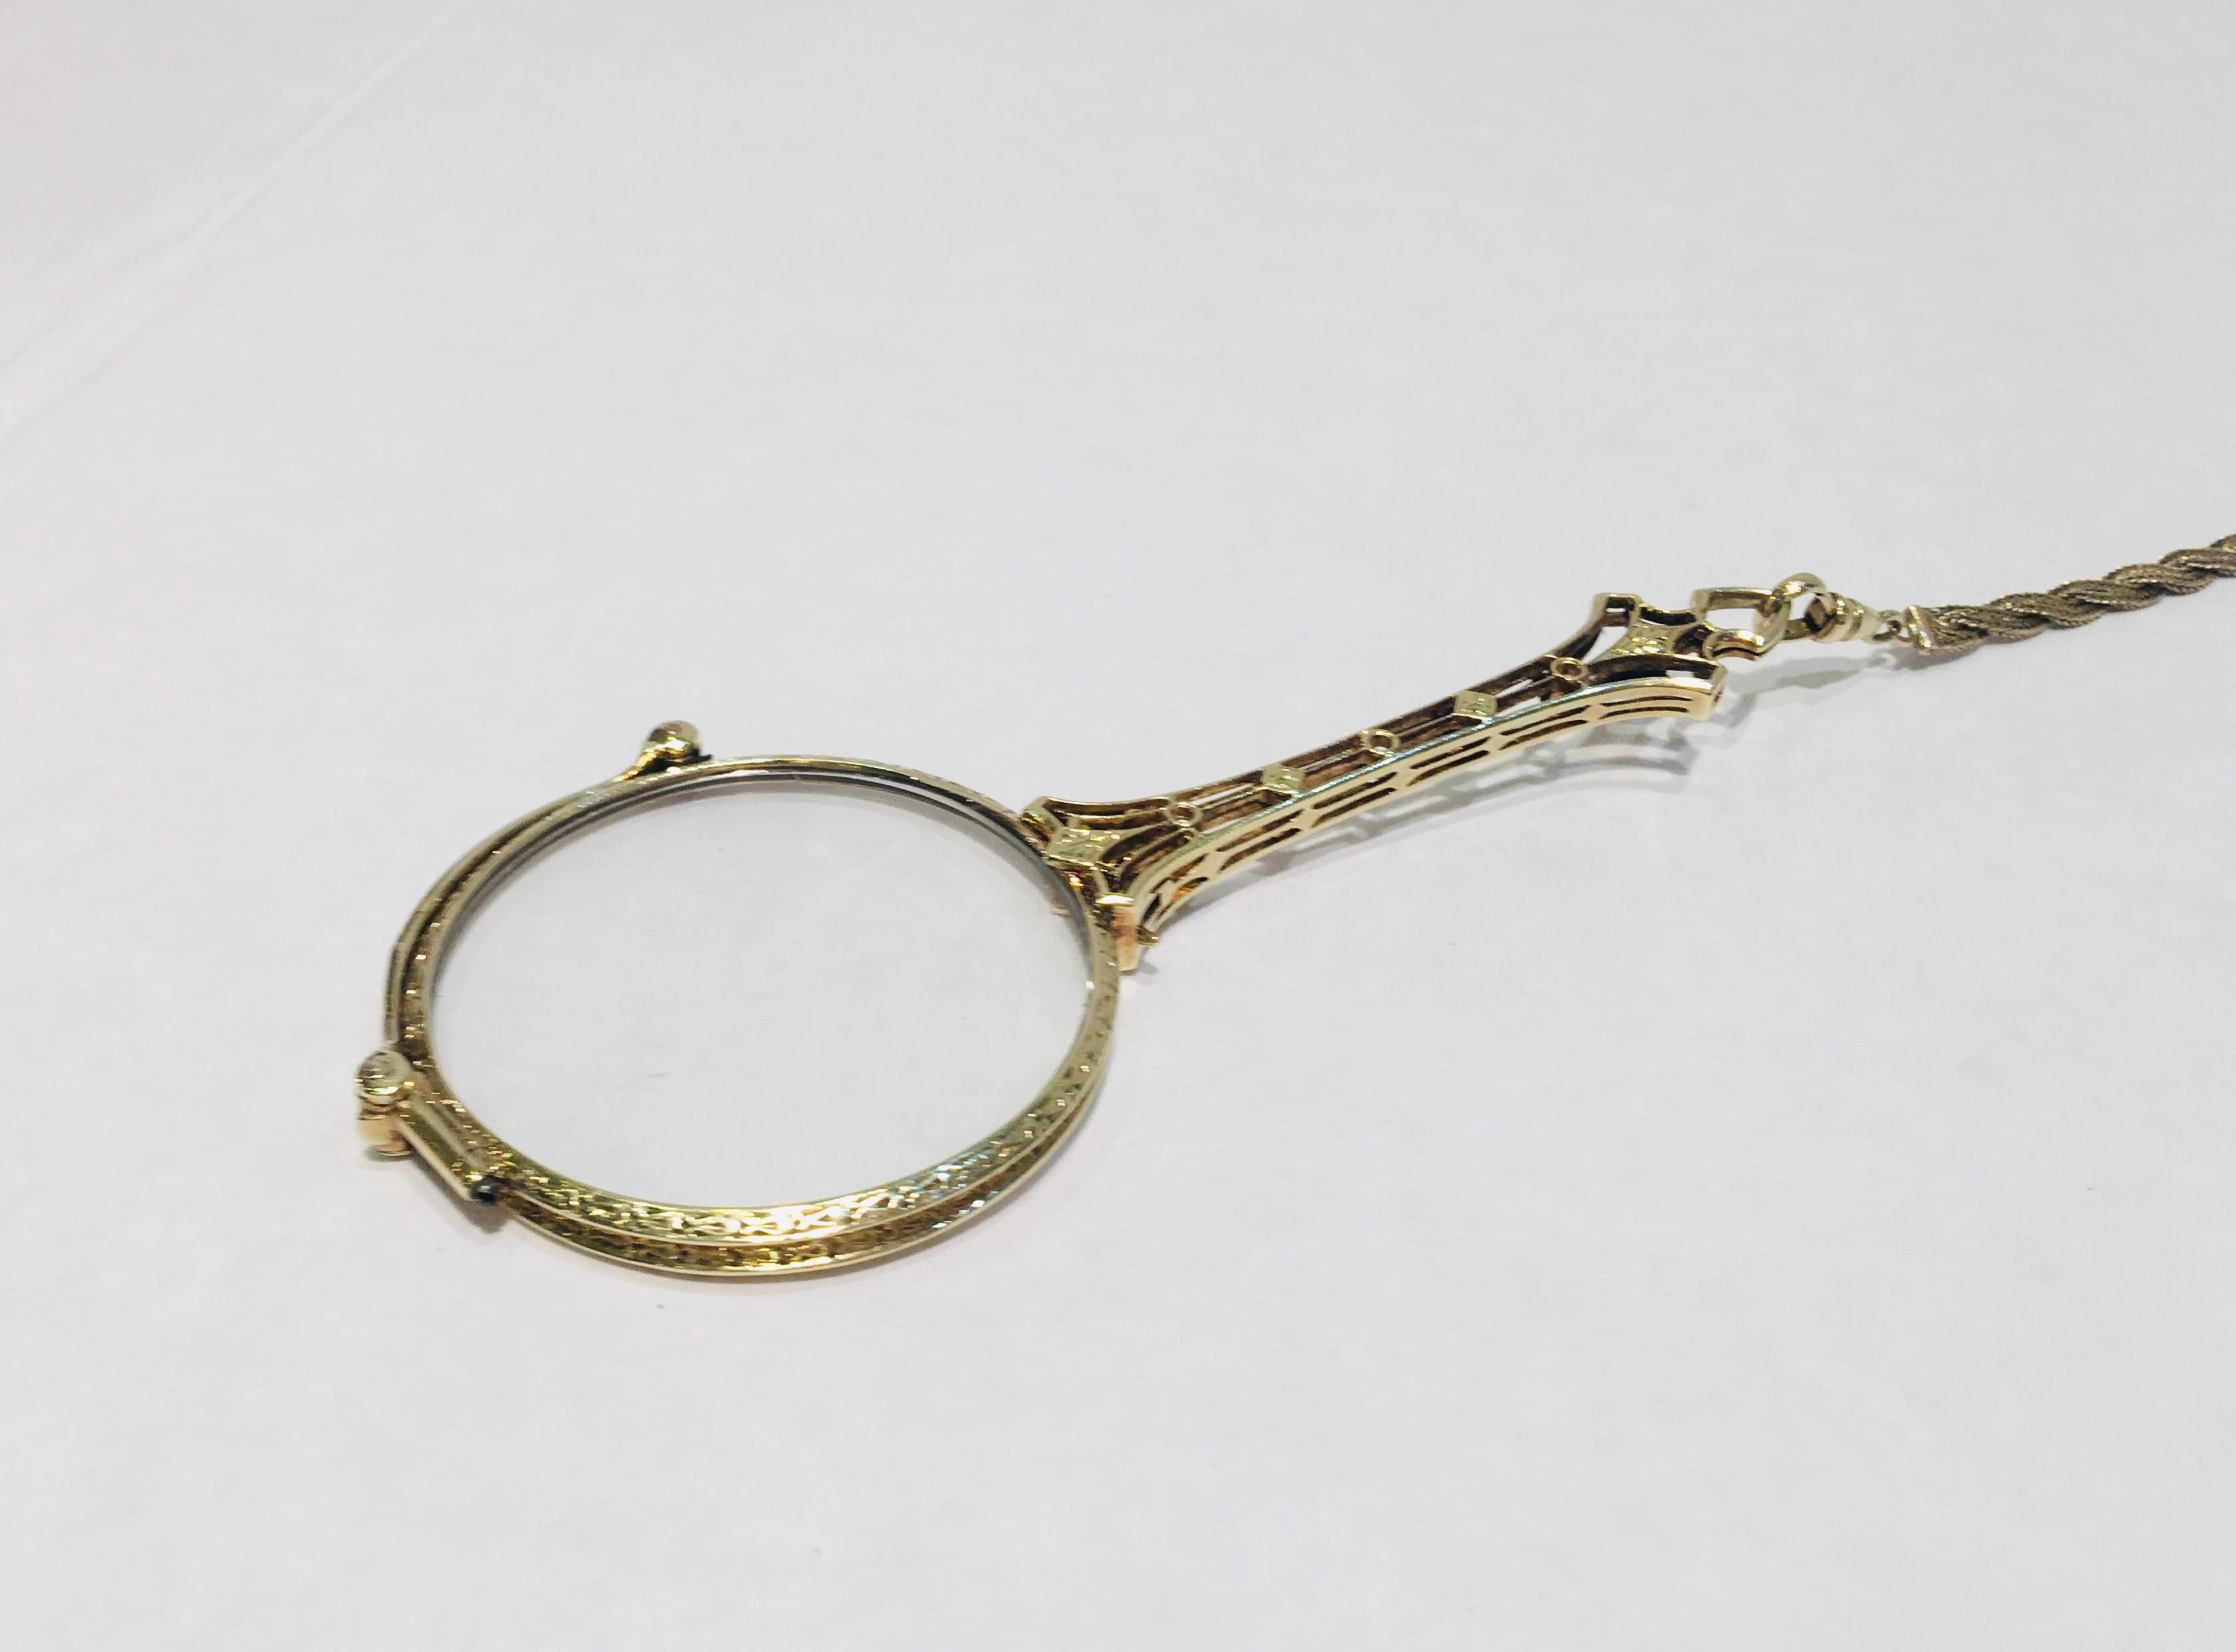 14 Karat Lorgnette Folding Eyeglasses with Gold, Diamond and Seed Pearls Lariat For Sale 6